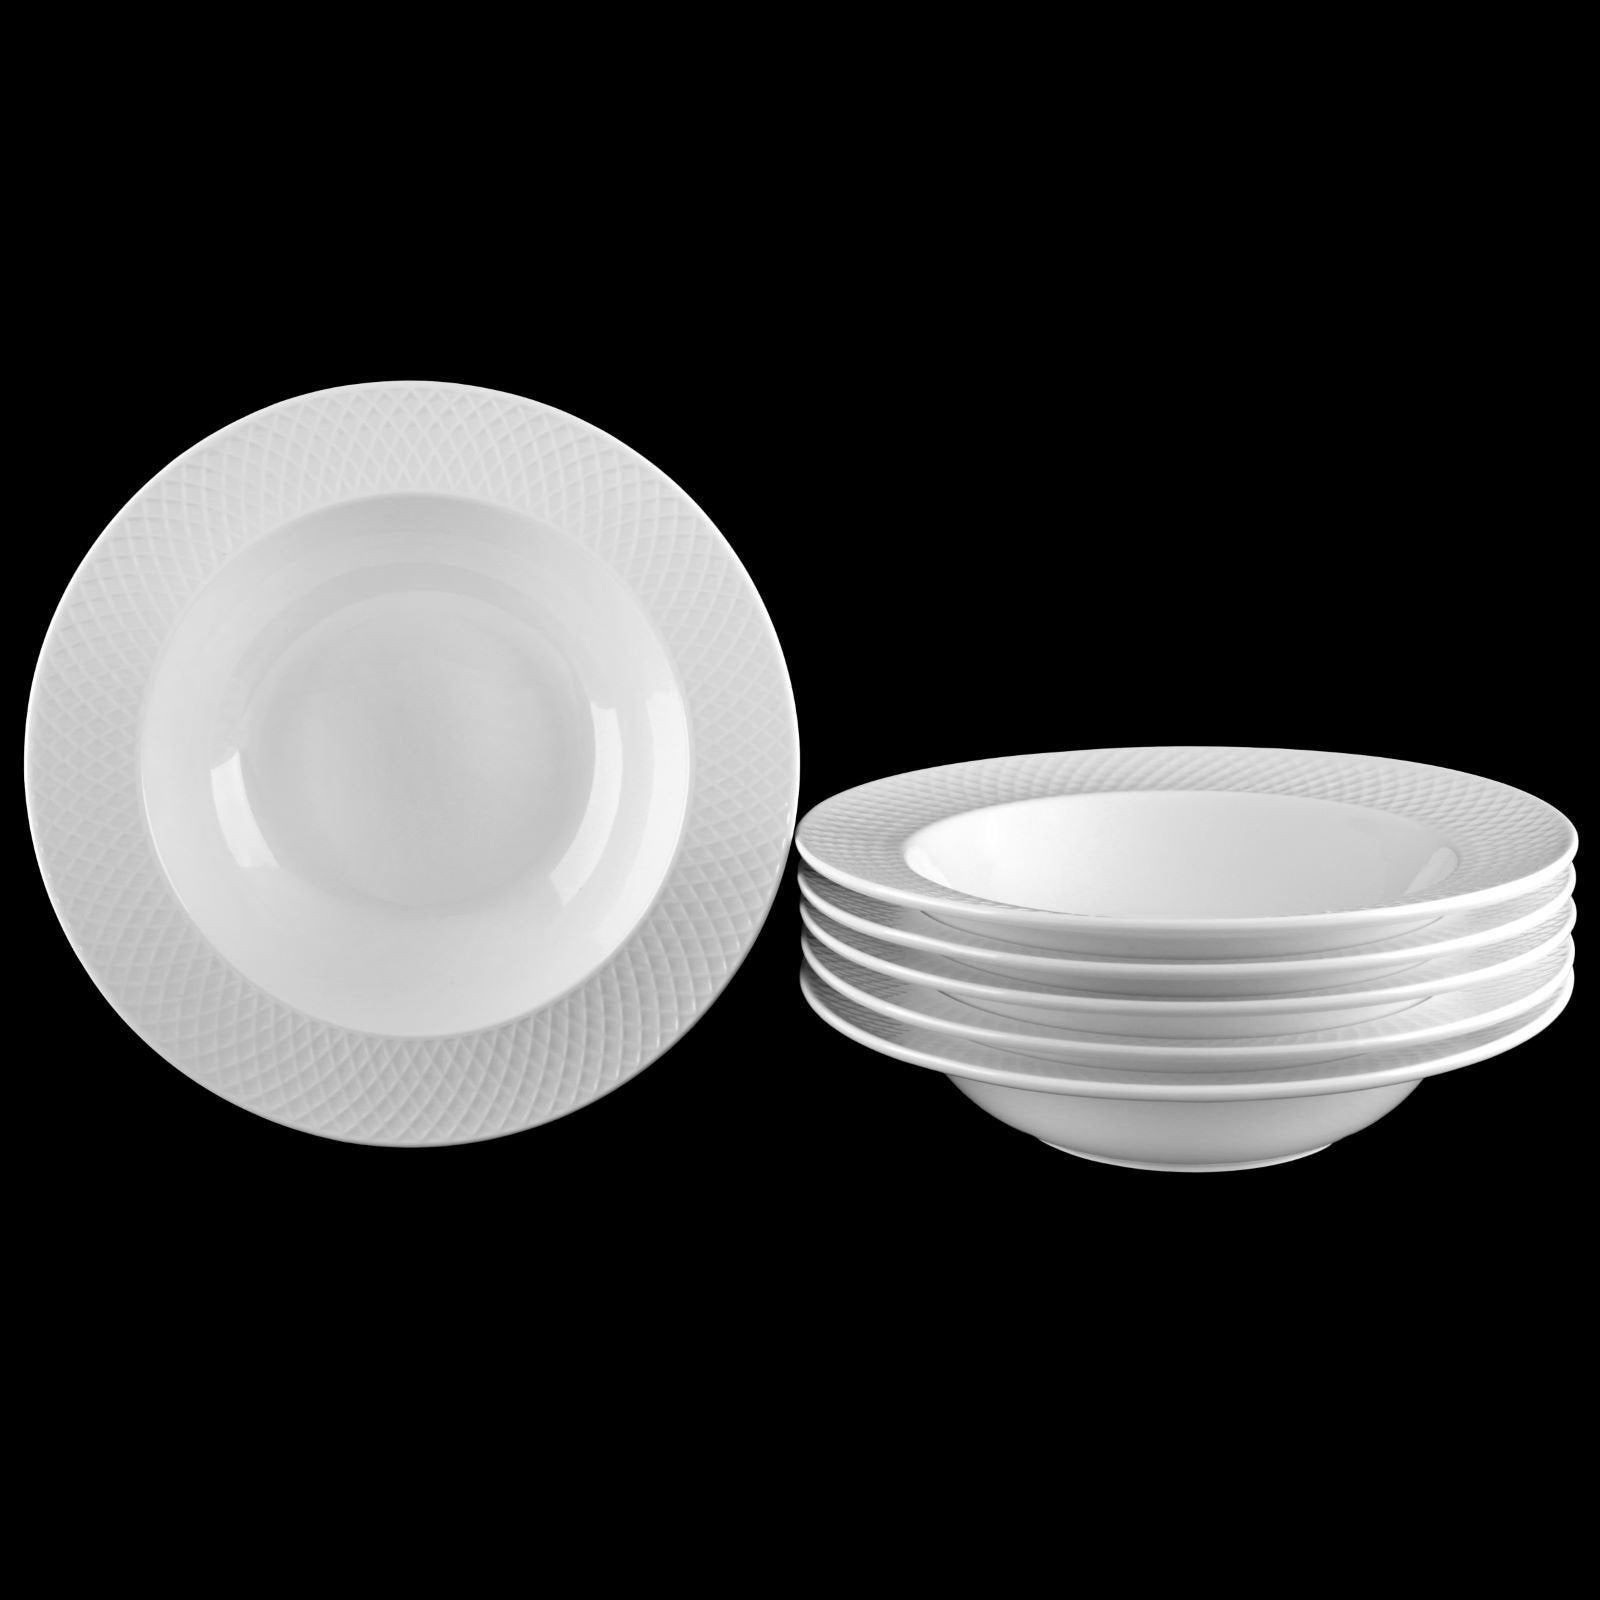 White Porcelain Deep Plate With Embossed Wide Rim 9" inch | For Soup, Pasta, Salad, Goodies N Stuff